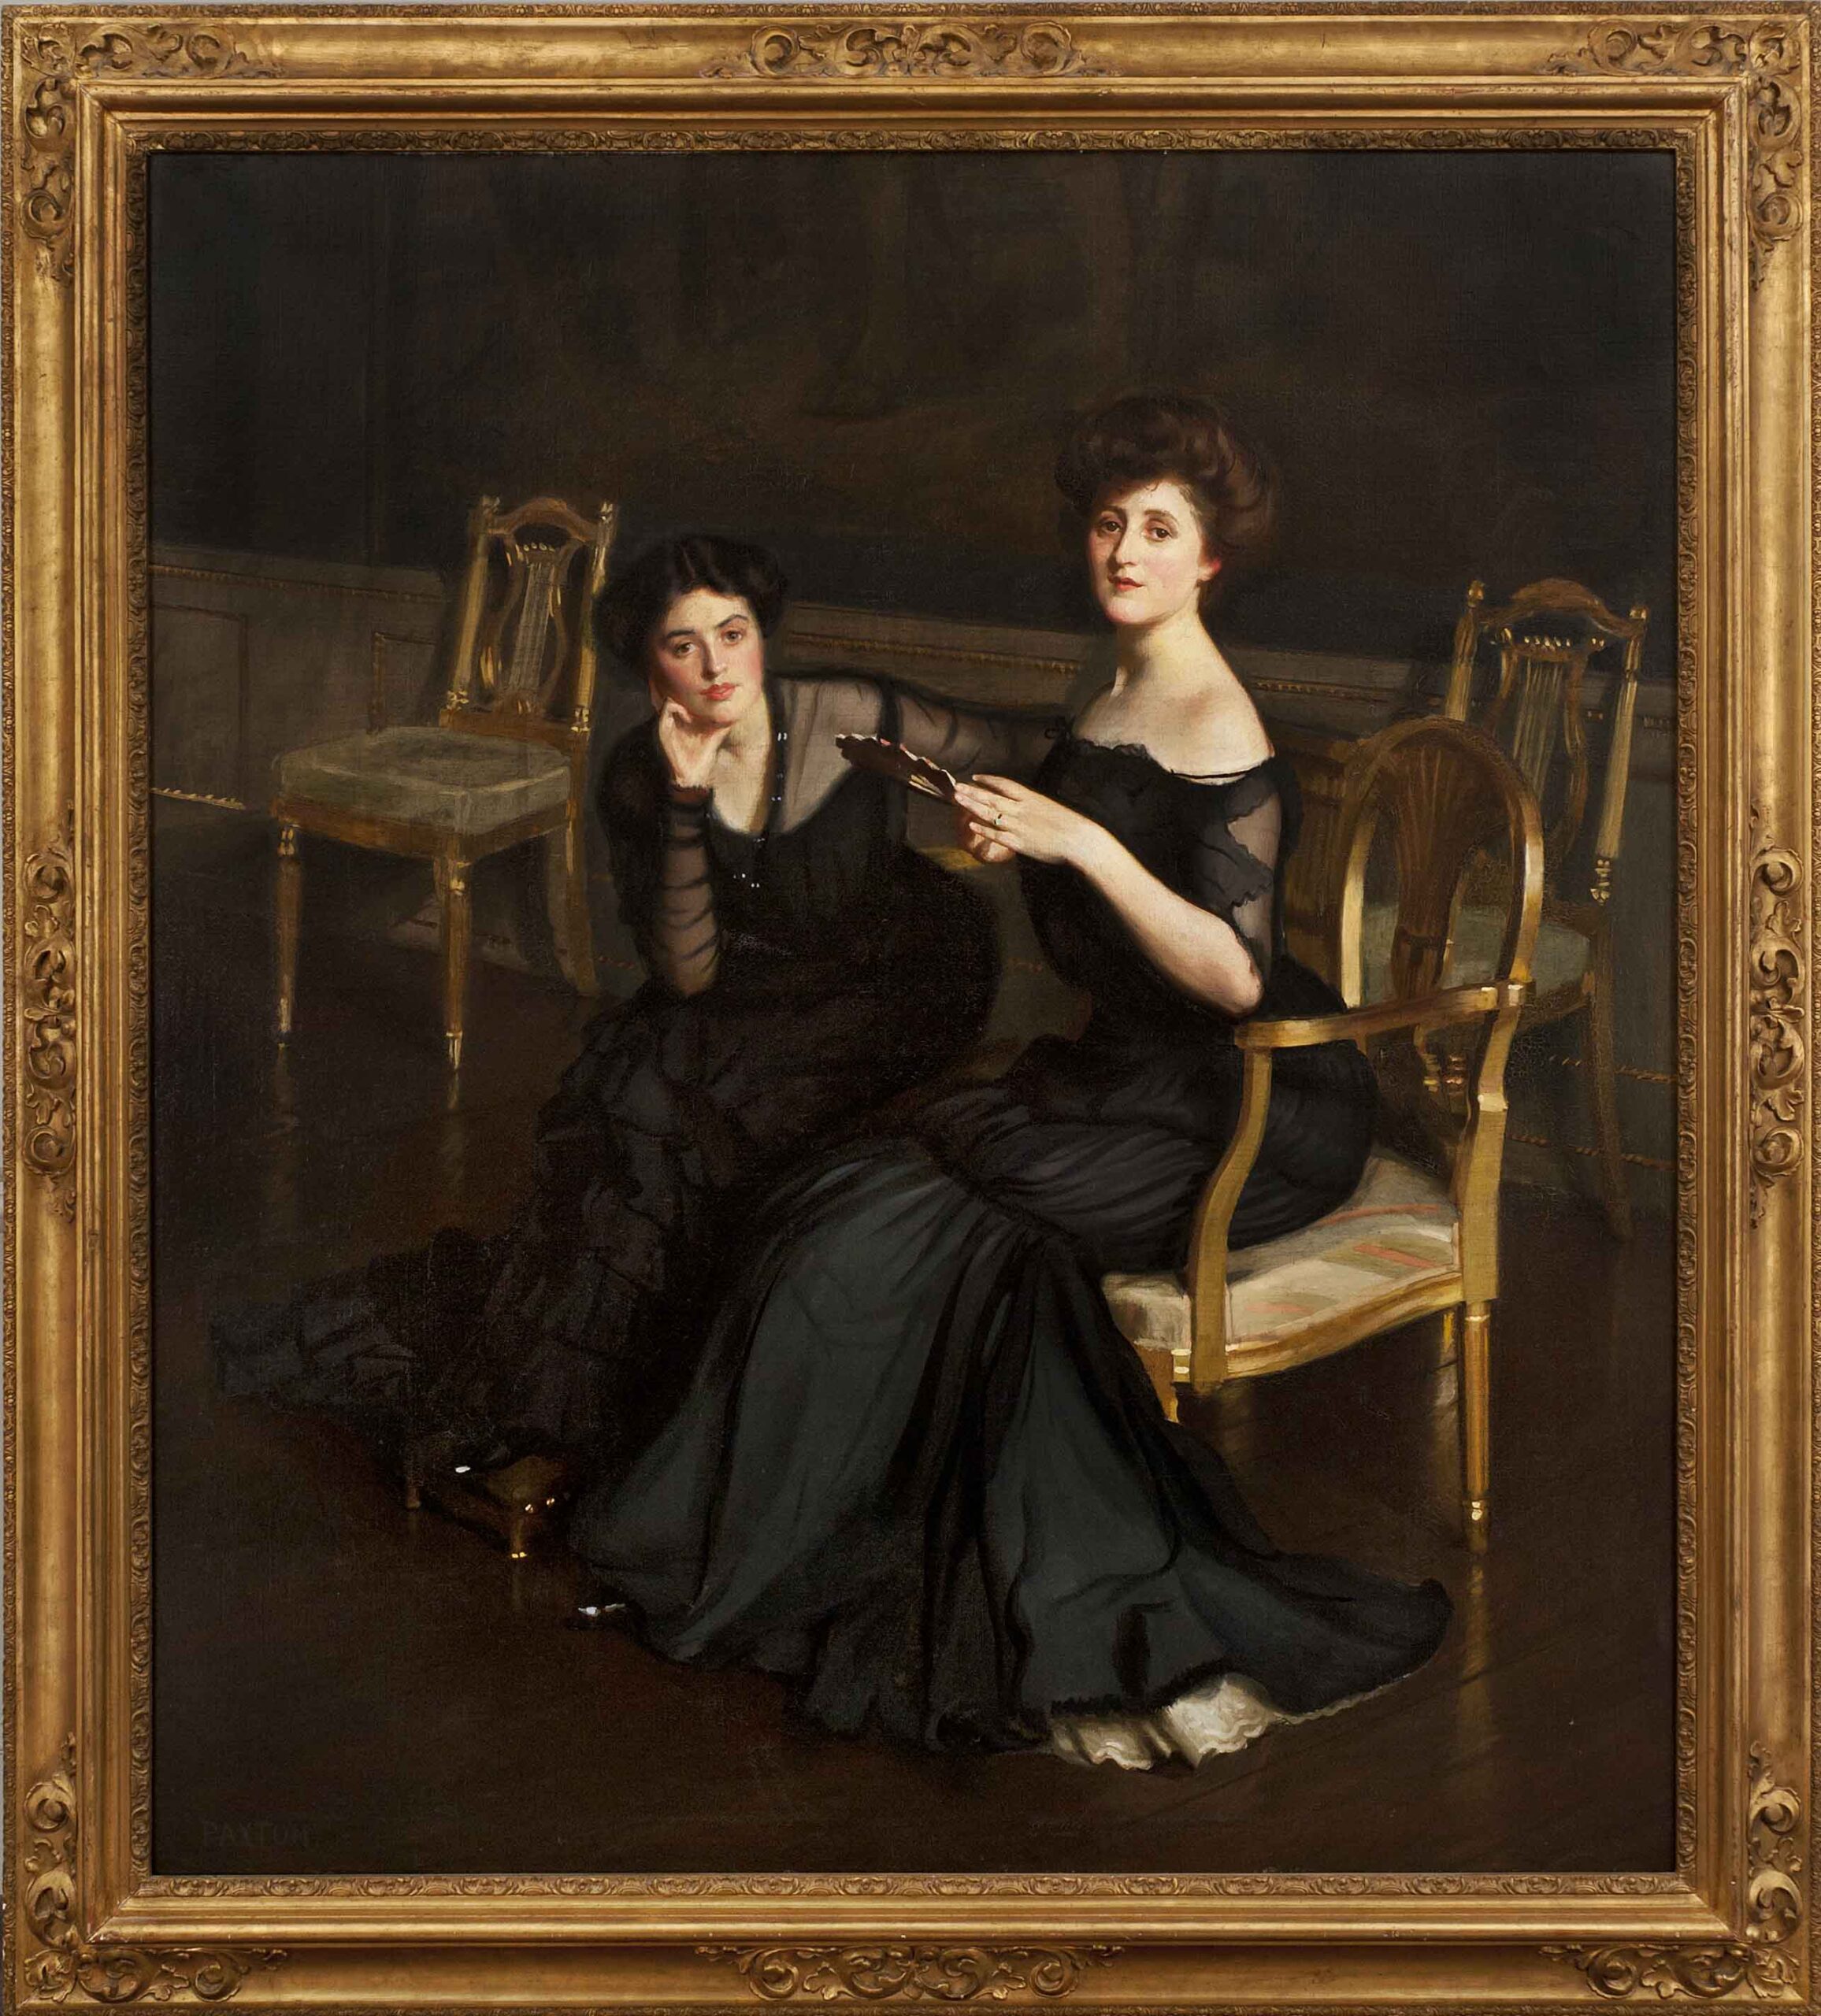 William McGregor Paxton, The Sisters